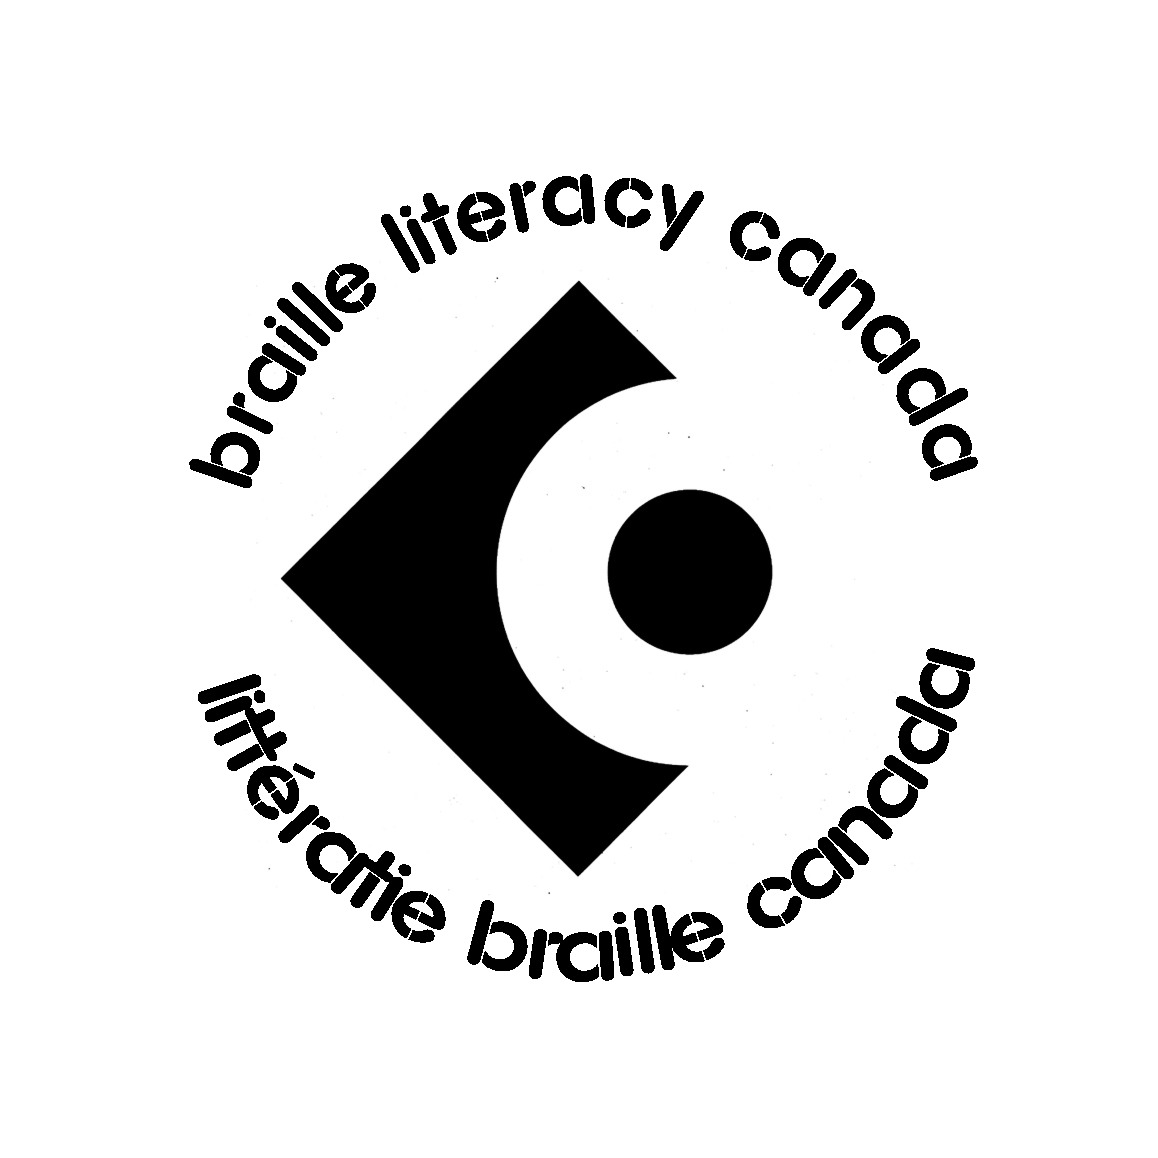 Braille Literacy Canada logo. Black text on a white background: braille literacy canada curves around an image at the top; littératie braille canada curves around the icon at the bottom. The icon is a black square with a white circle cutting out a black dot